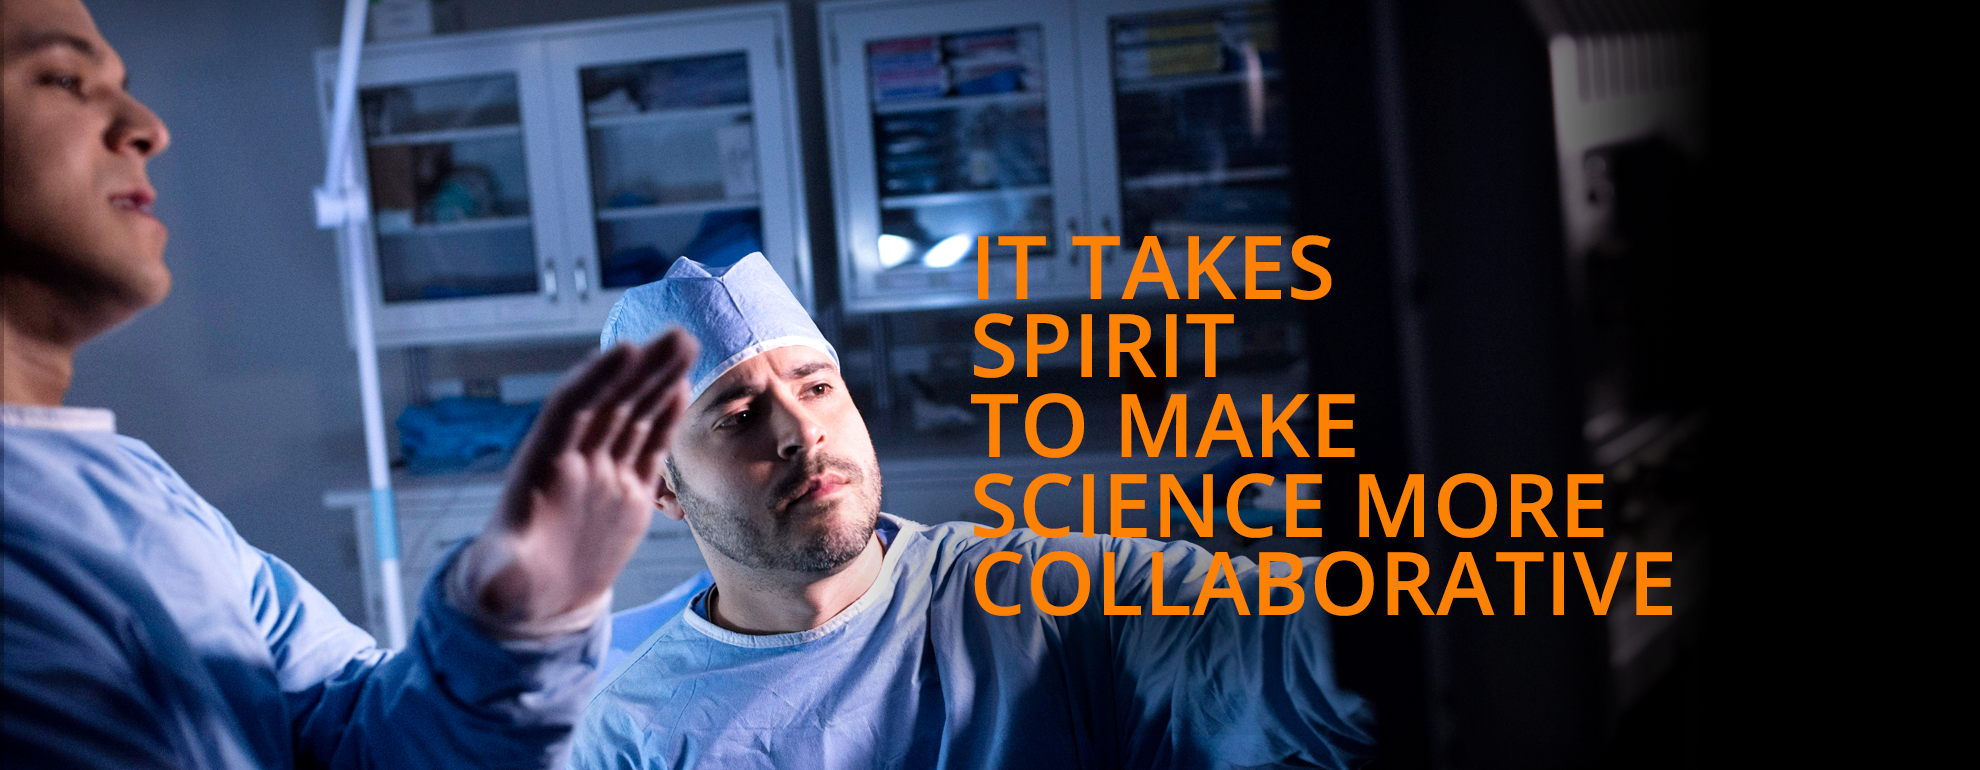 Background image with doctors looking at screen. Animated text "It takes imagination to make science more transformative. It takes spirit to make science more collaborative. It takes grit to make science more purposeful."